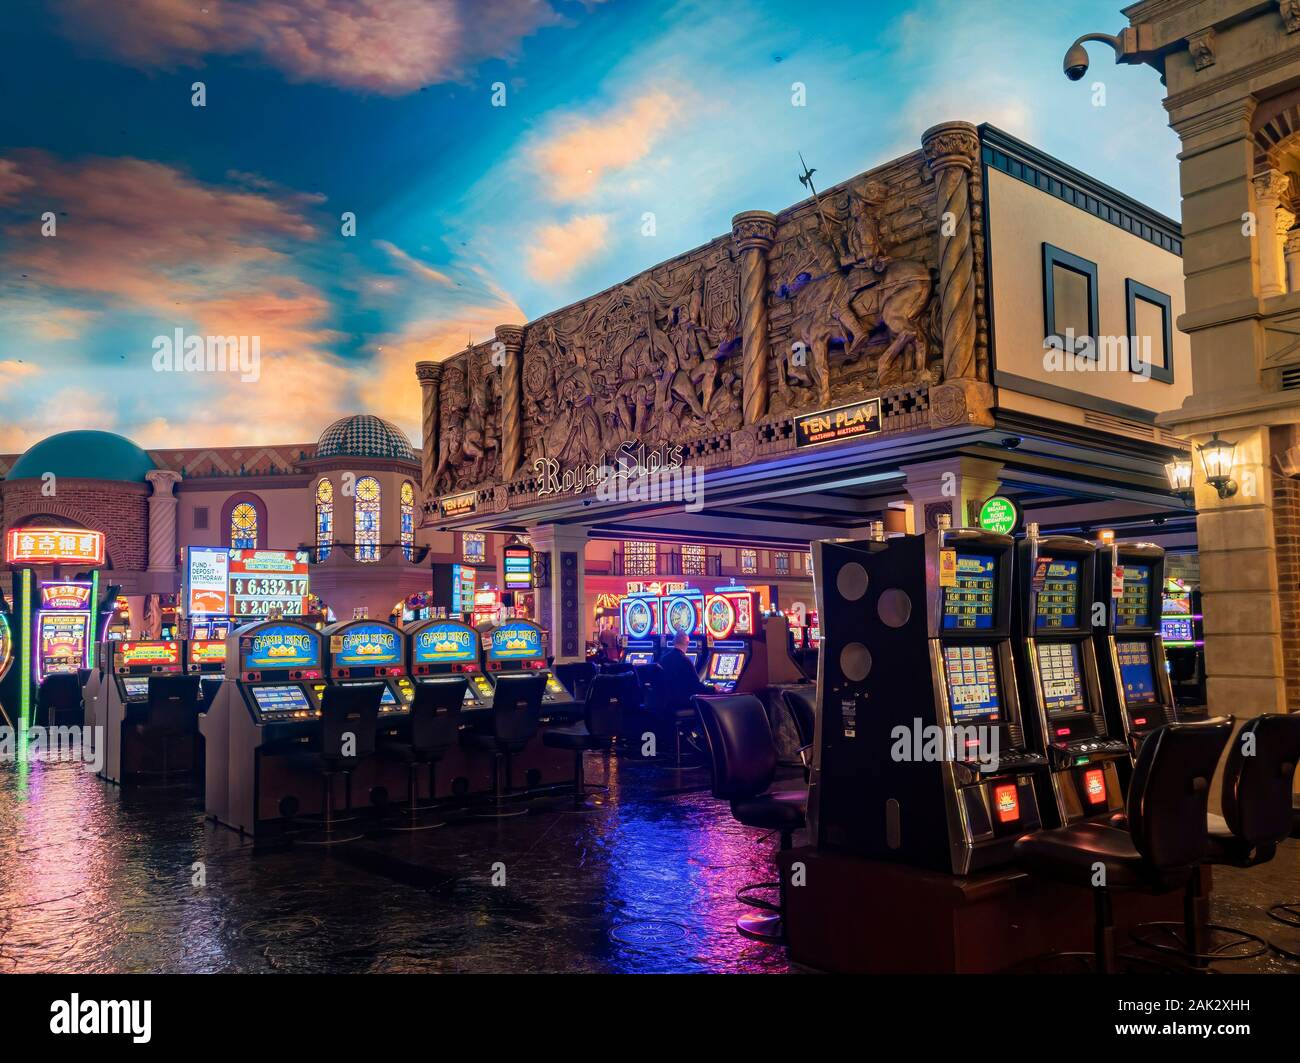 Las Vegas, JAN 3: Interior view of the famous Sunset Station Hotel and  Casino on JAN 3, 2020 at Las Vegas, Nevada Stock Photo - Alamy